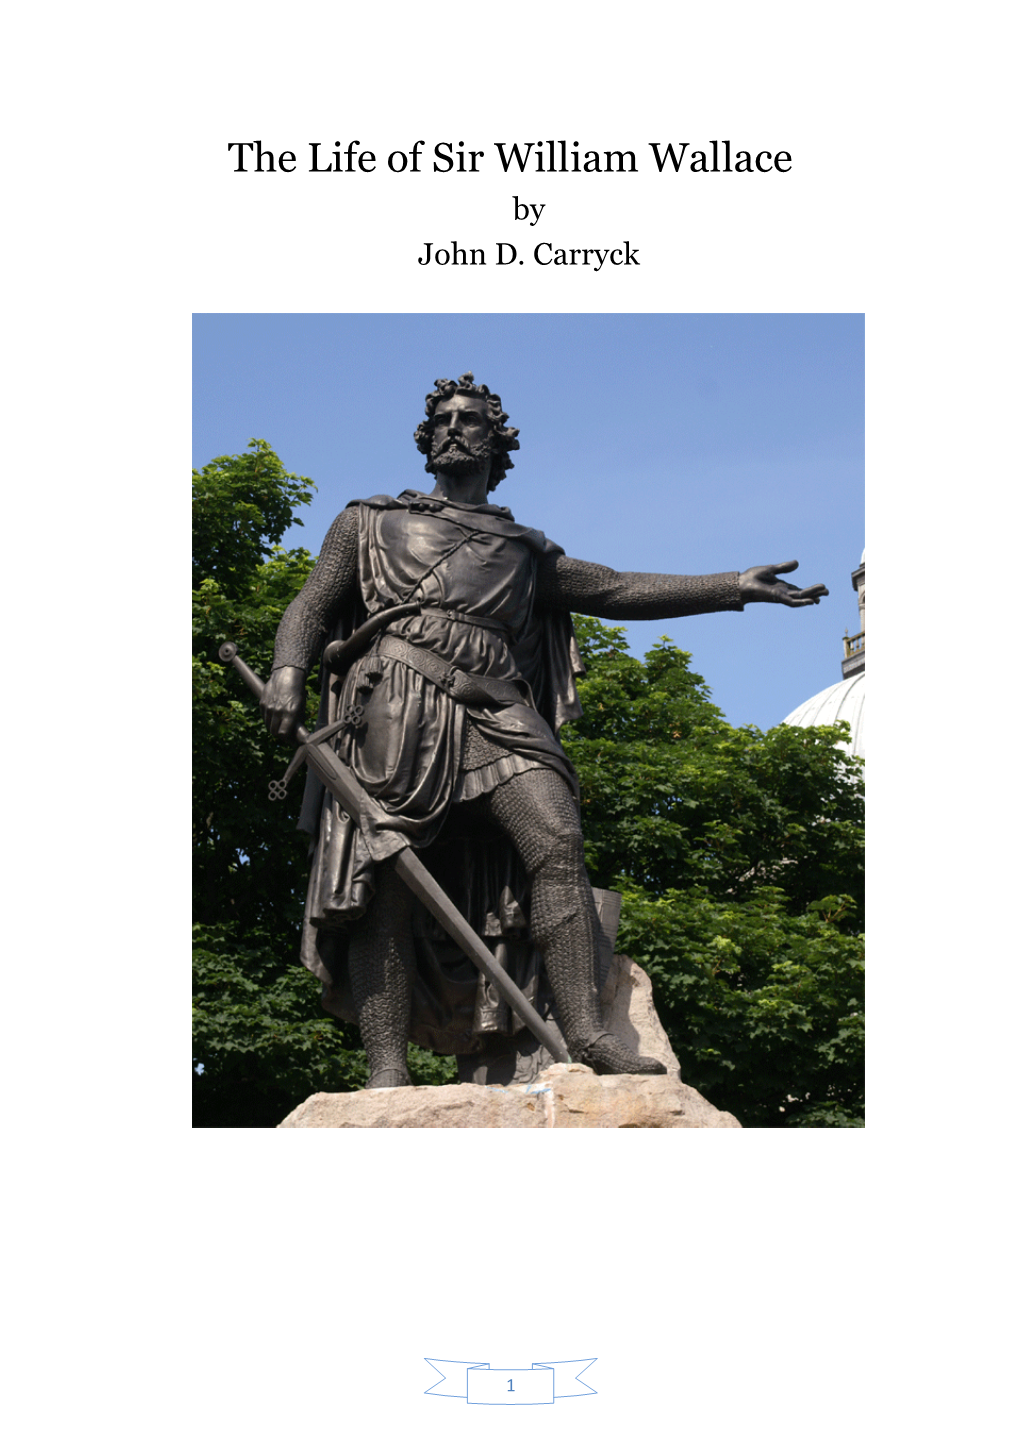 The Life of Sir William Wallace by John D